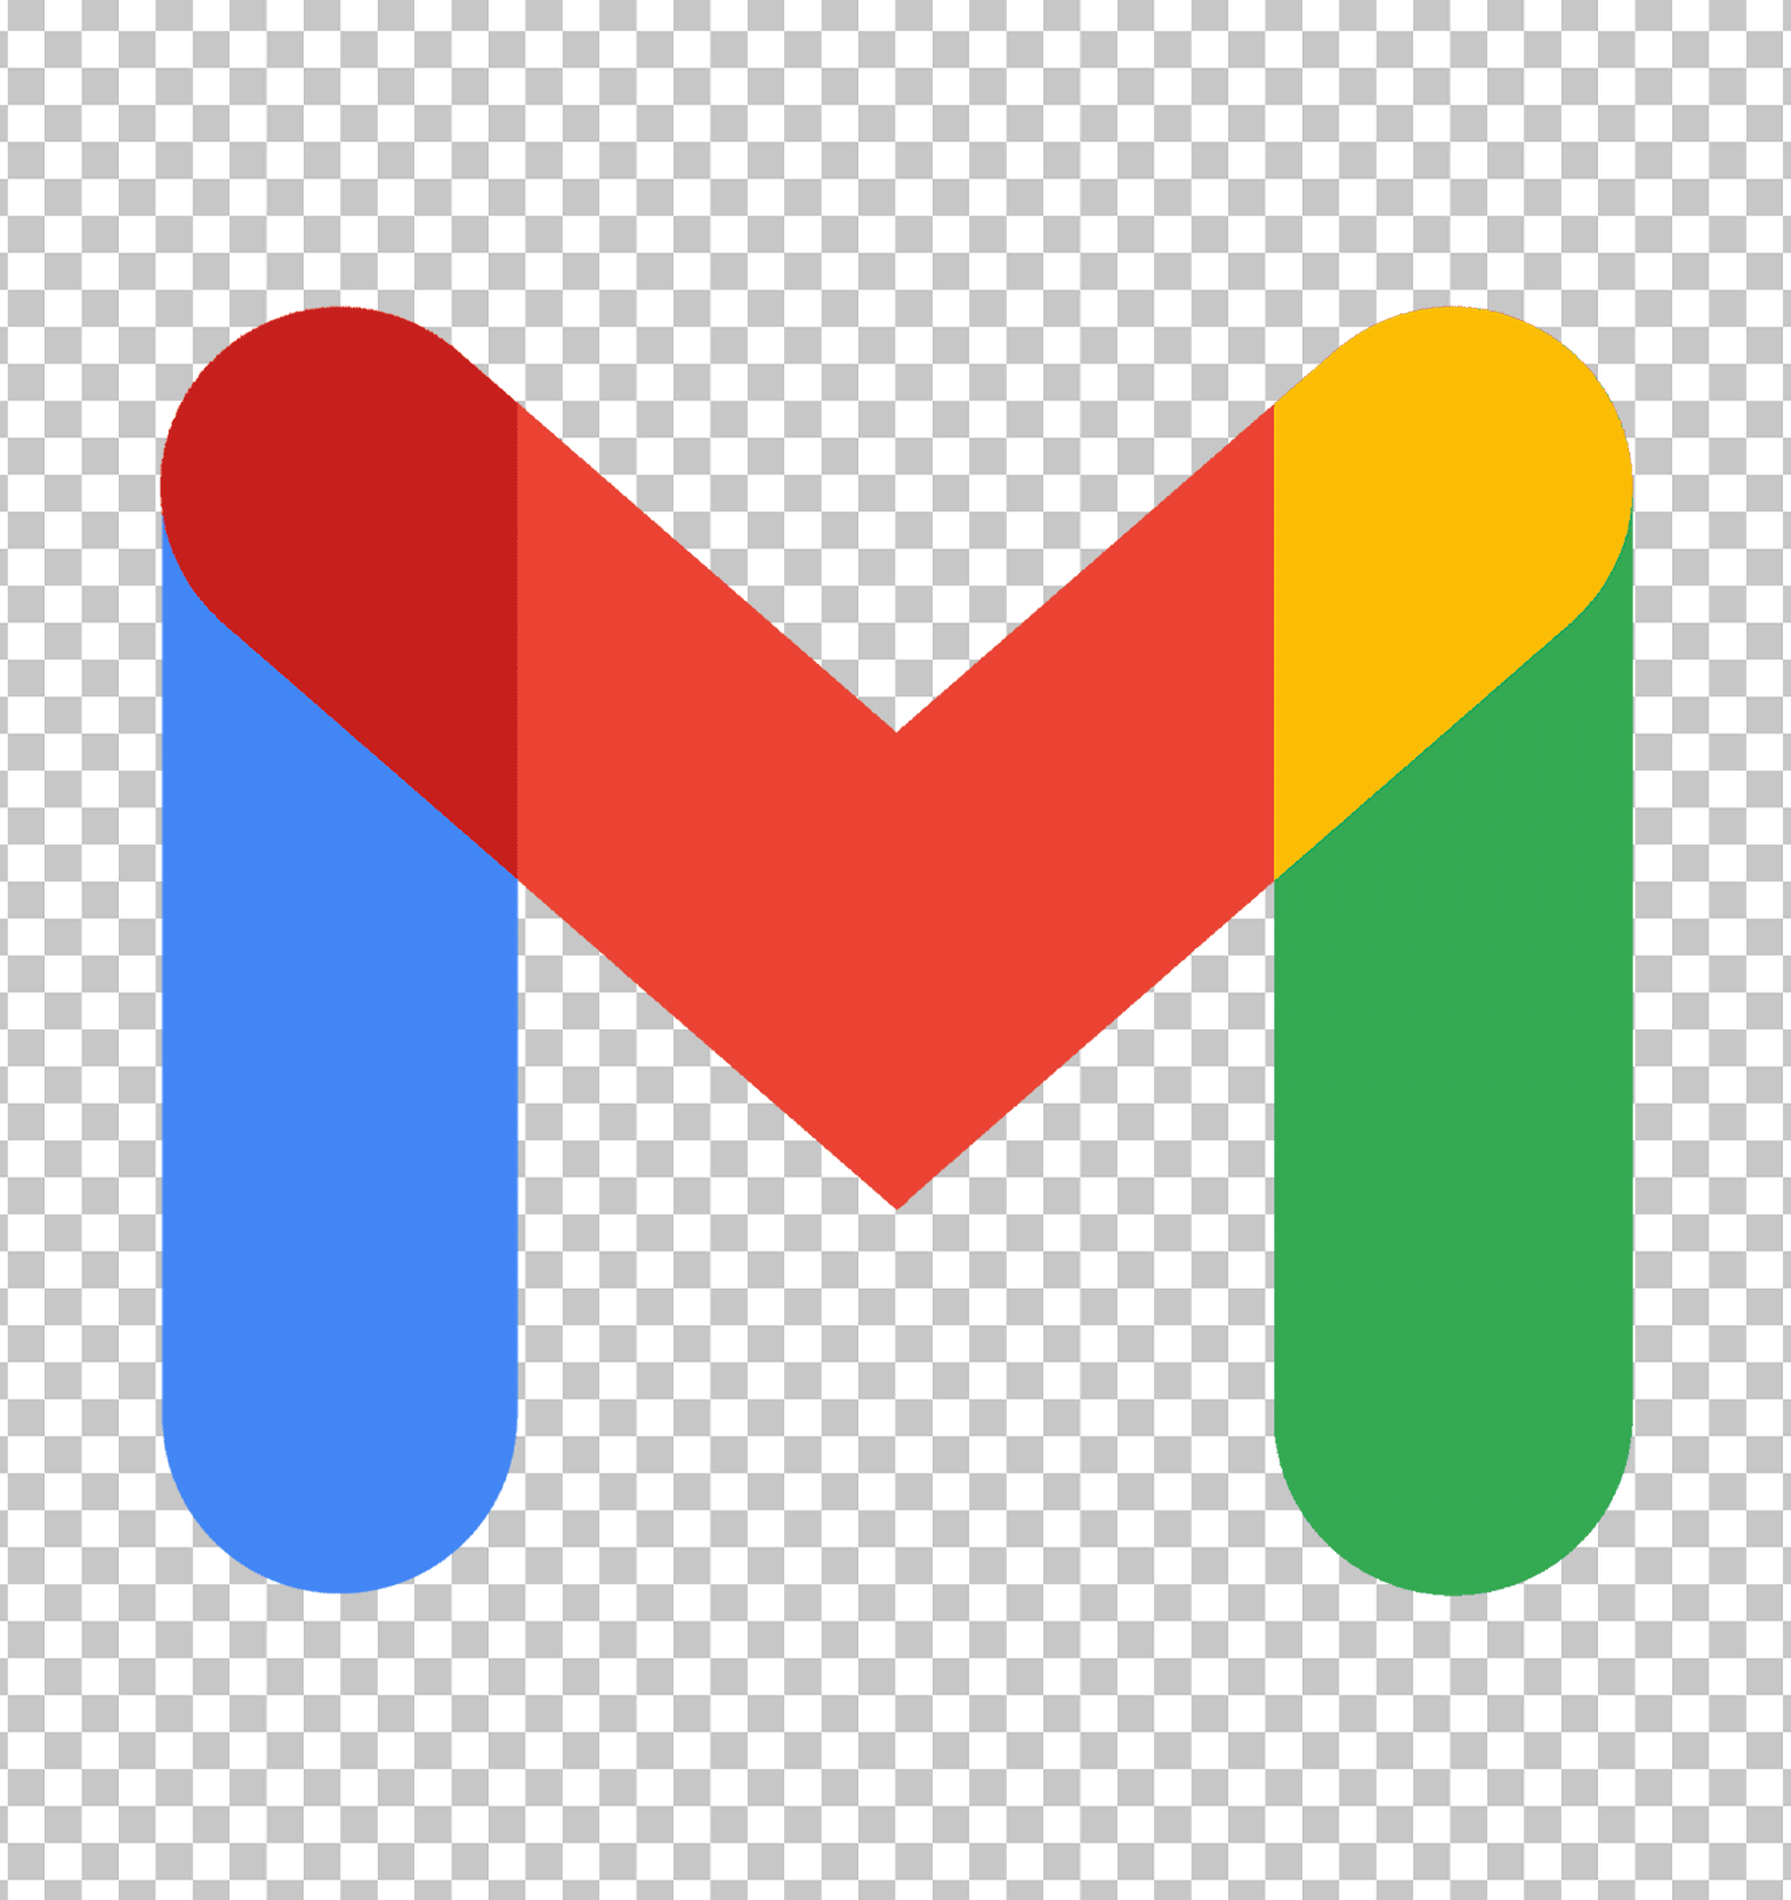 Gmail 2020 logo, colorful icon with letter "M" in the middle, blue, red, yellow, green squares arranged in checkerboard pattern